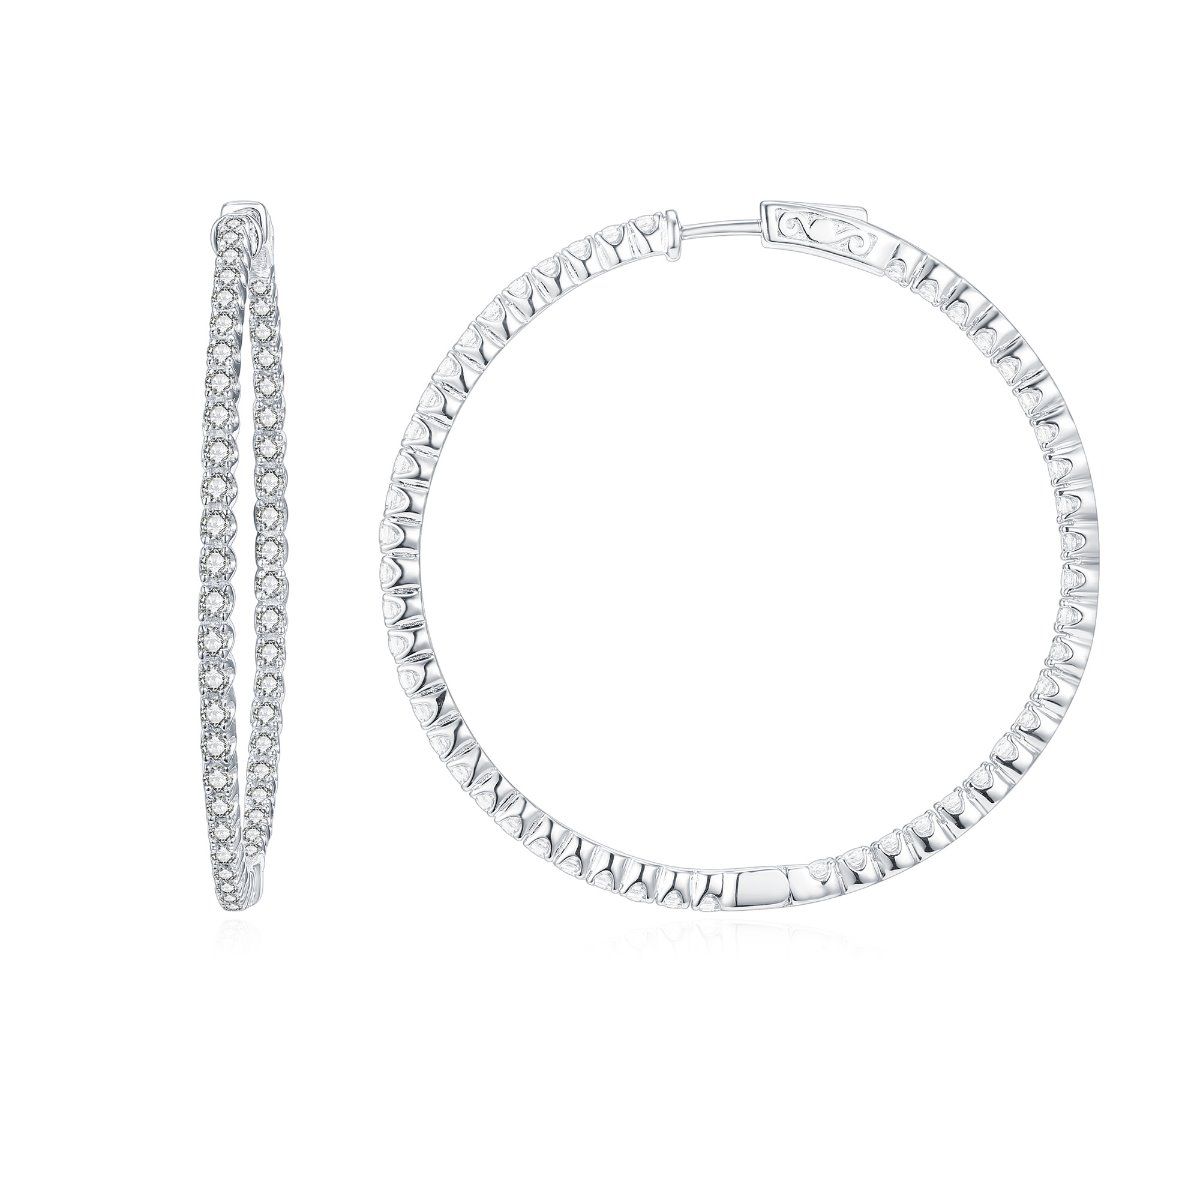 40mm Inside-out White CZ Hoops